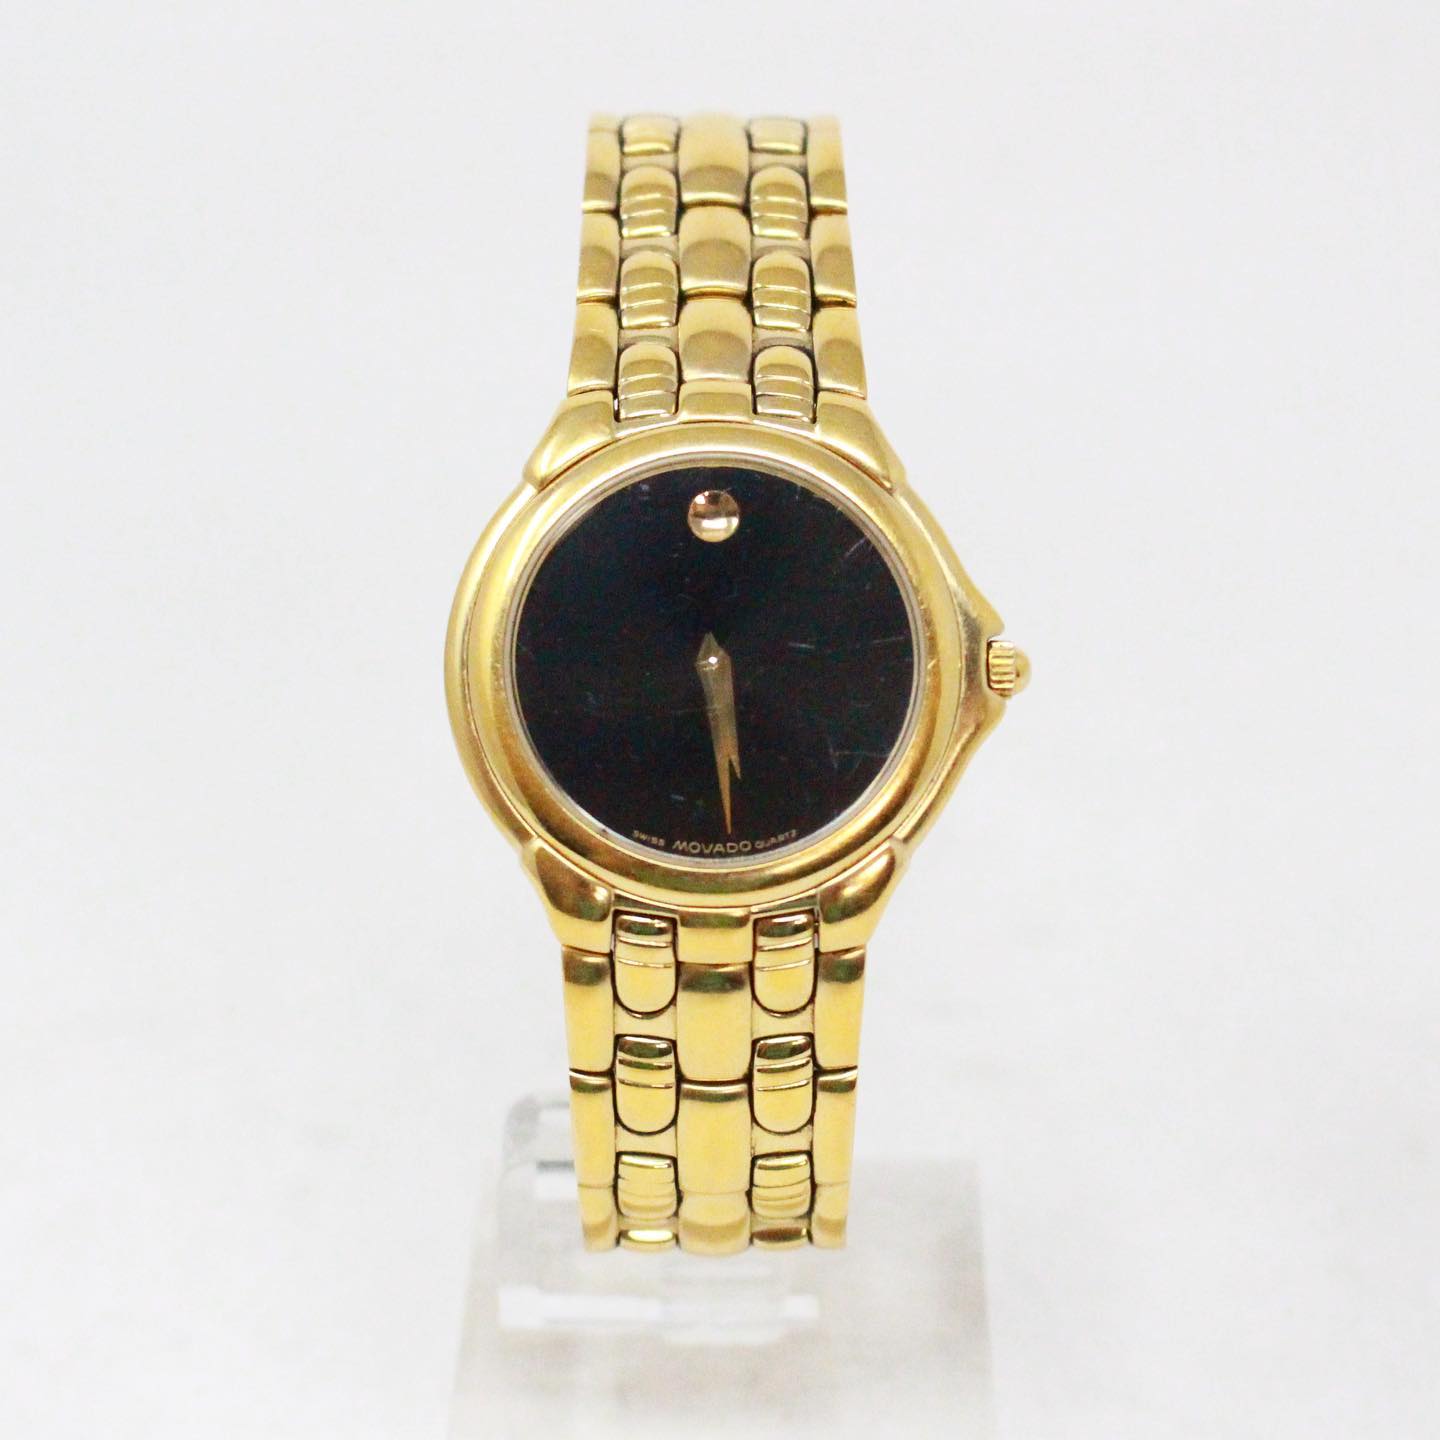 MOVADO Gold Tone Stainless Steel Chain Link Watch item 40382 1 1